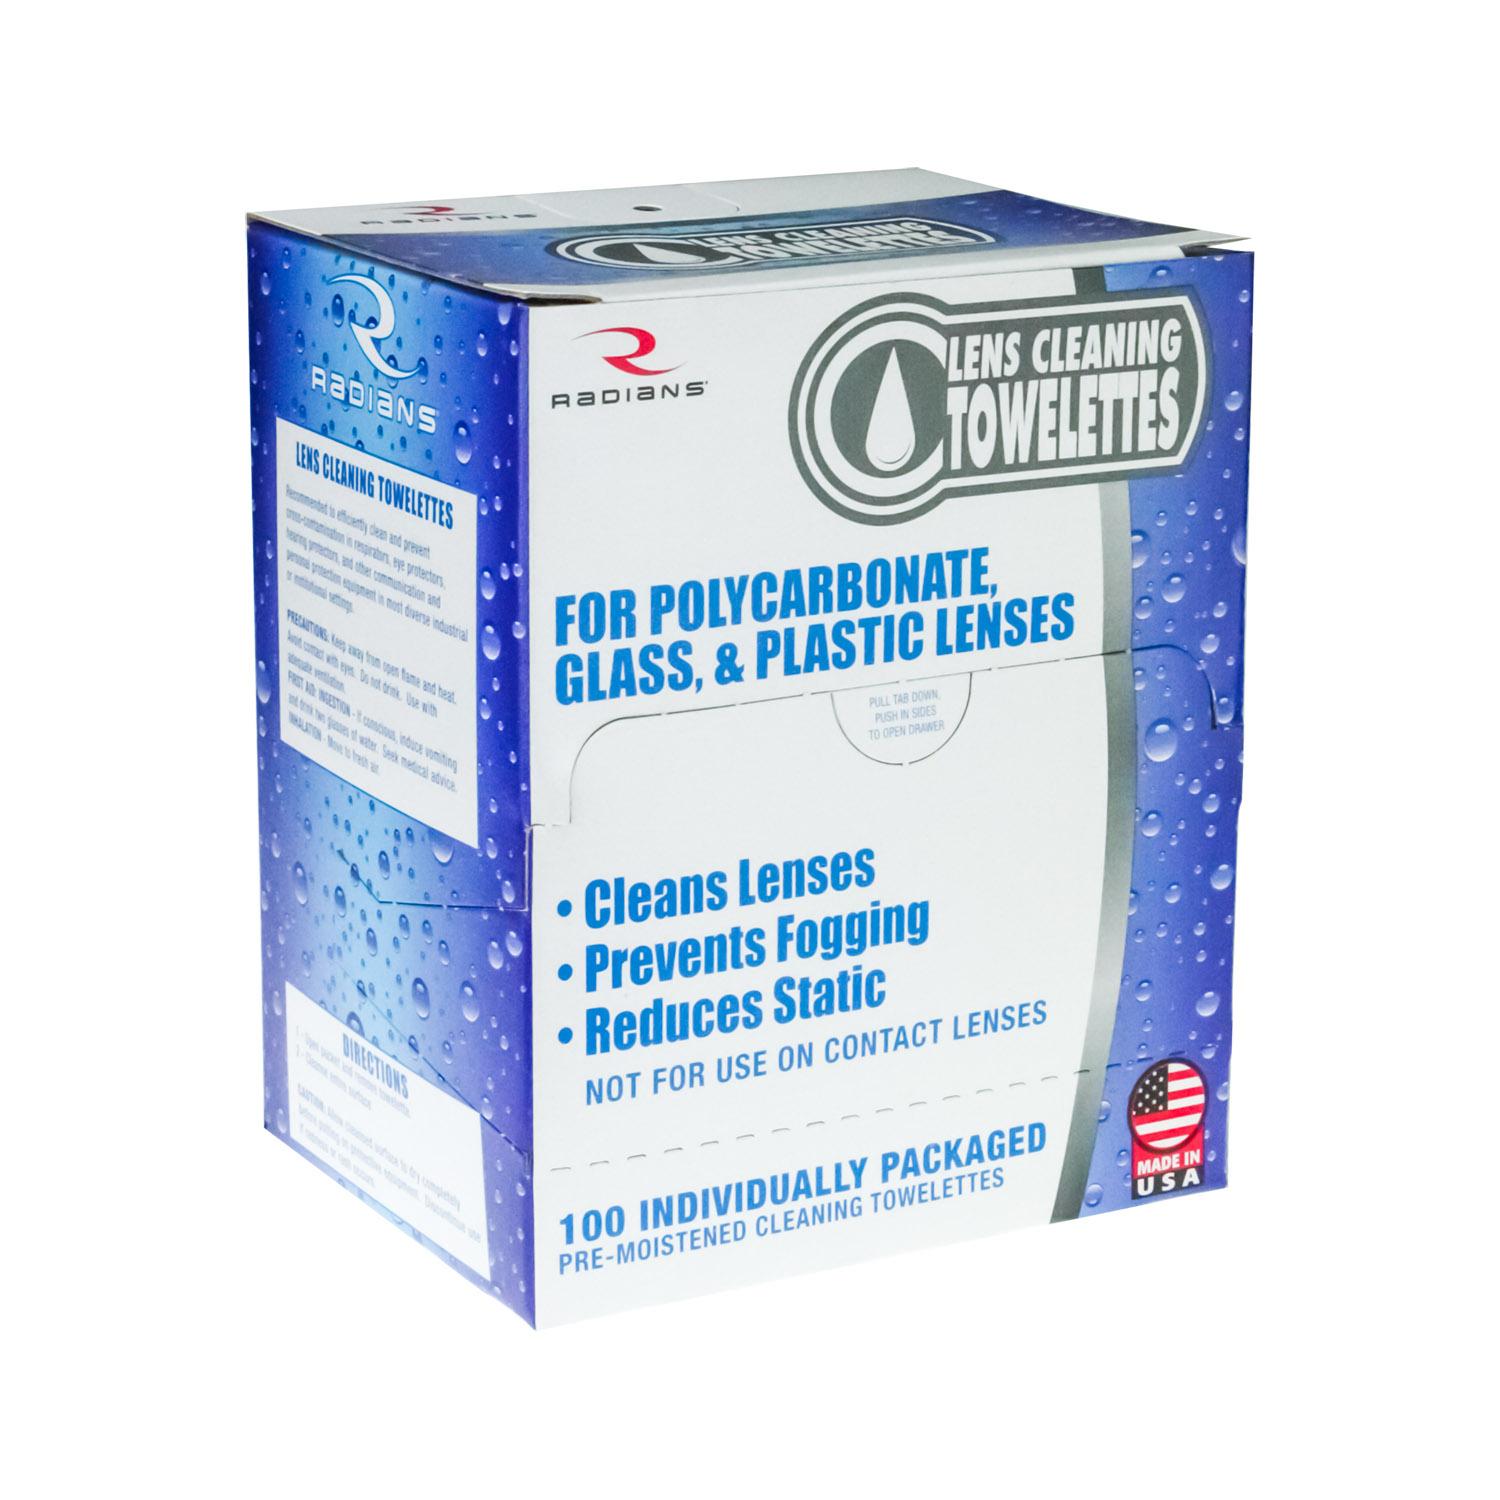 Lens Cleaning Towelettes - 100 Count - in Box